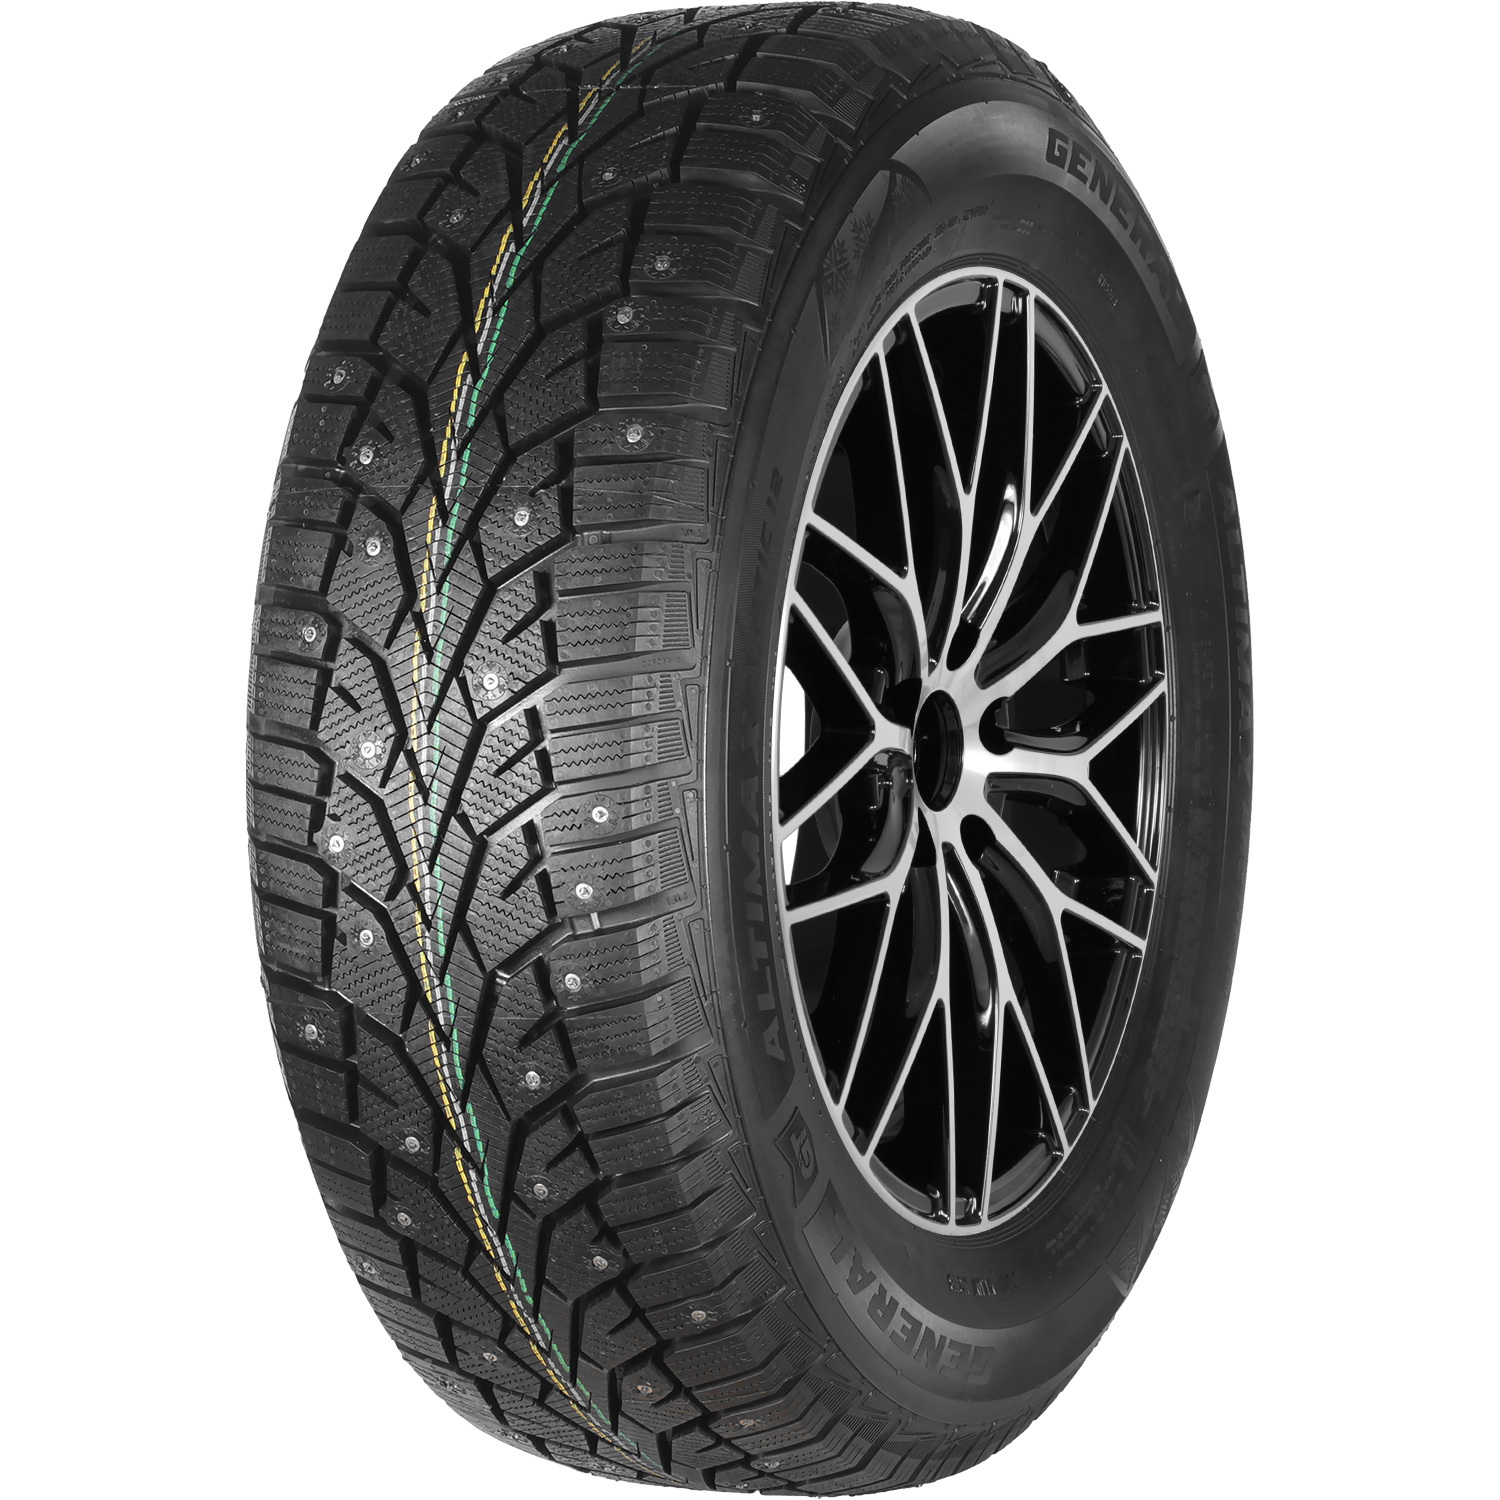 Автомобильная шина General Tire Altimax Arctic 12 185/65 R14 90T Шипованные camping spare tire cover car accessories custom spare tire covers your own personalized design tire protectors